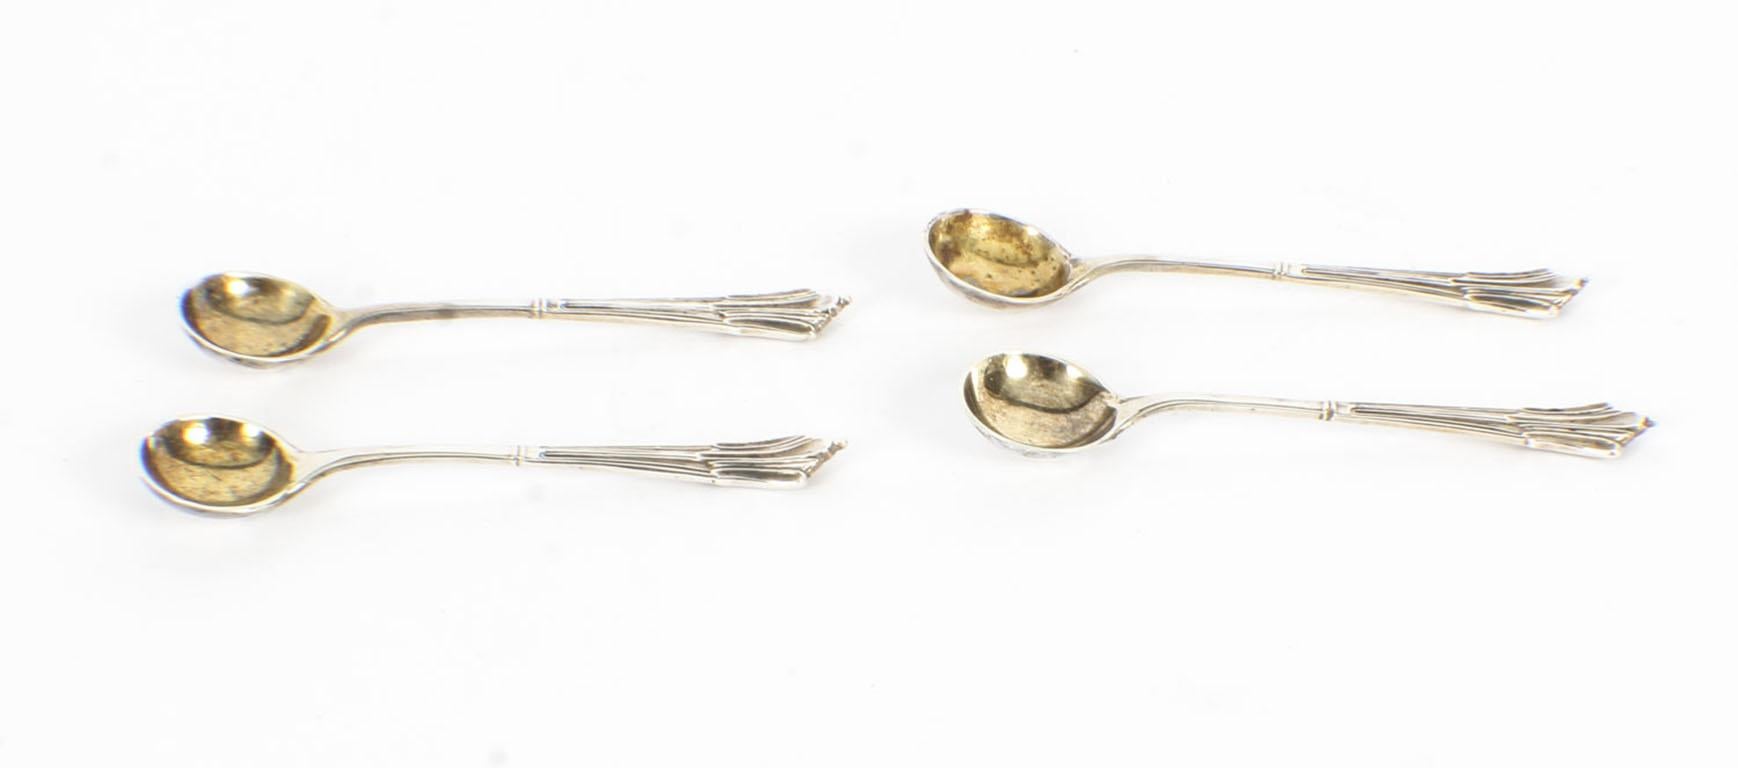 Antique Set of 4 Silver Gilt Salts with Spoons Charles Boyton 1885, 19th Century 8